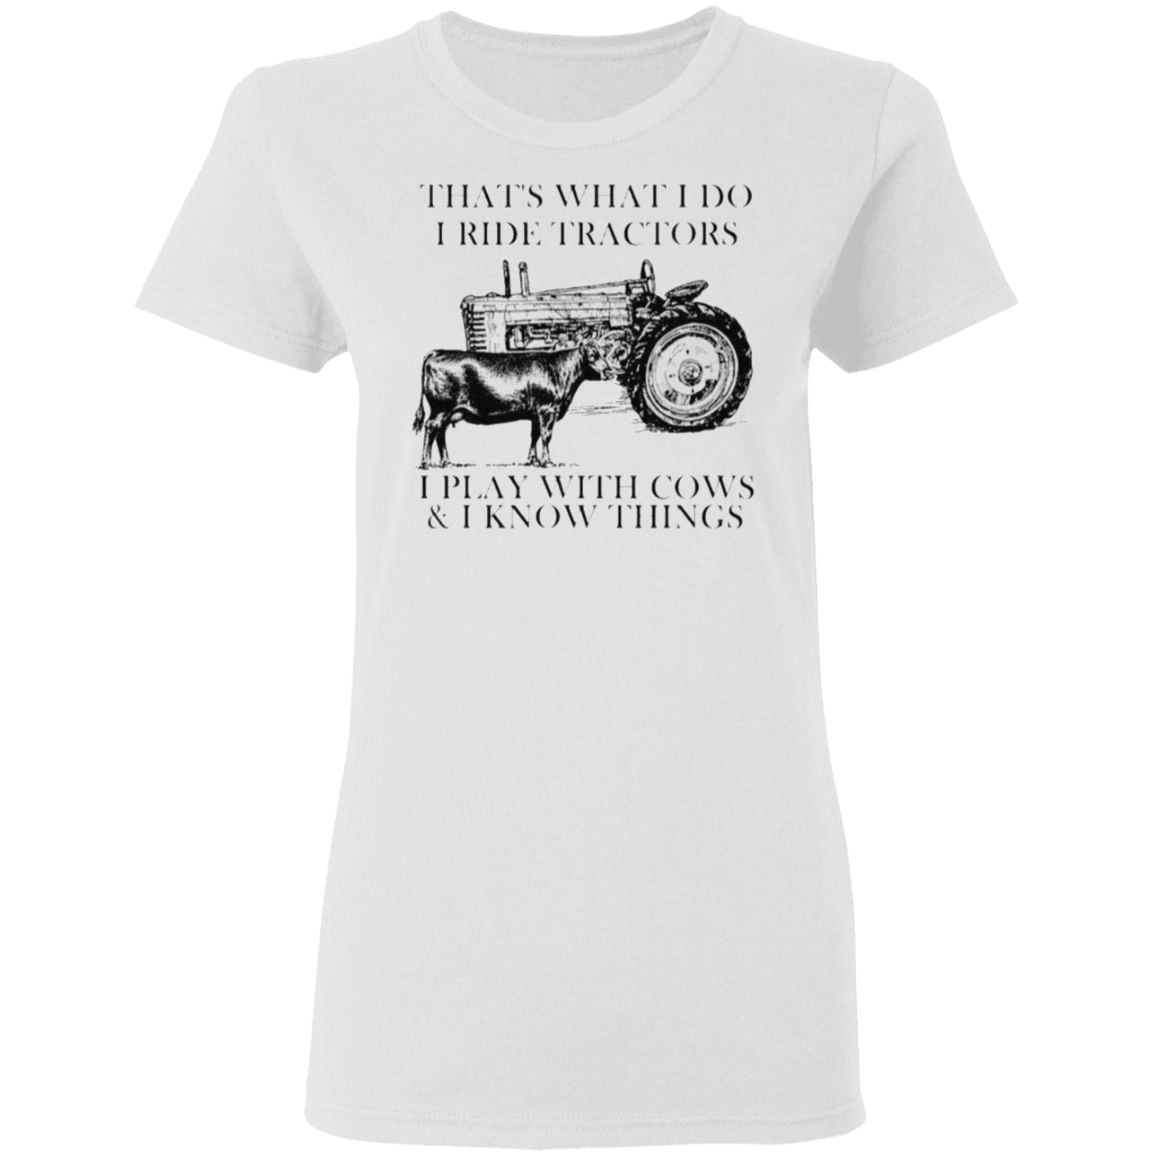 That’s what I do I ride tractors I play with cows and I know things t shirt